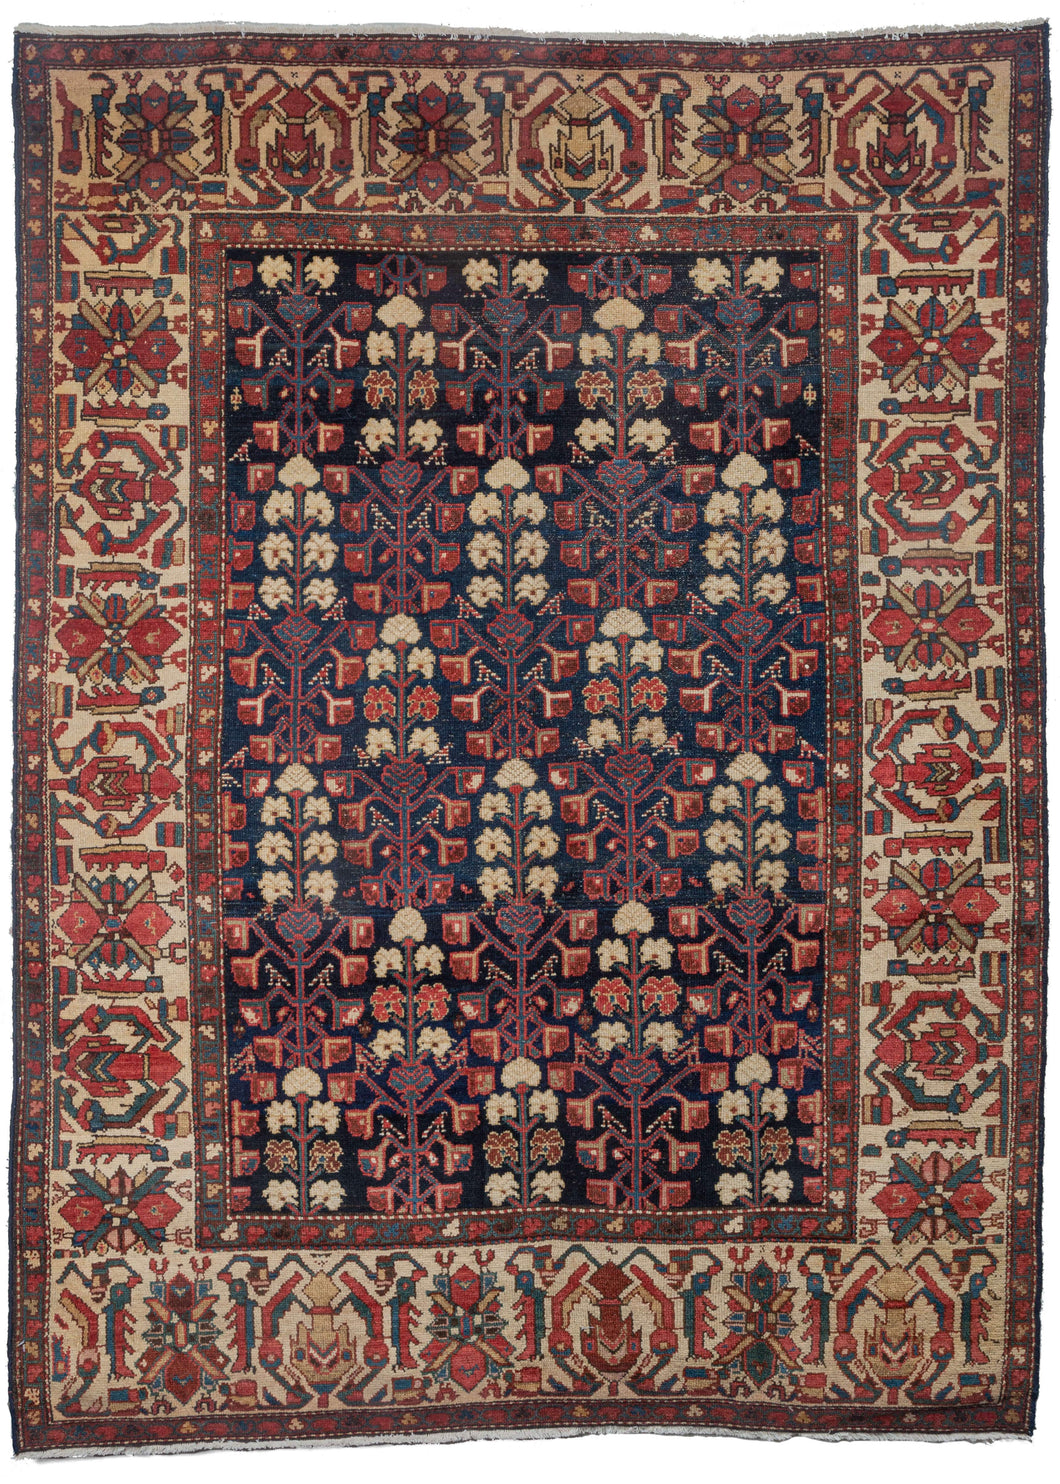 Antique NW Persian Malayer area rug with colorful border and allover floral design